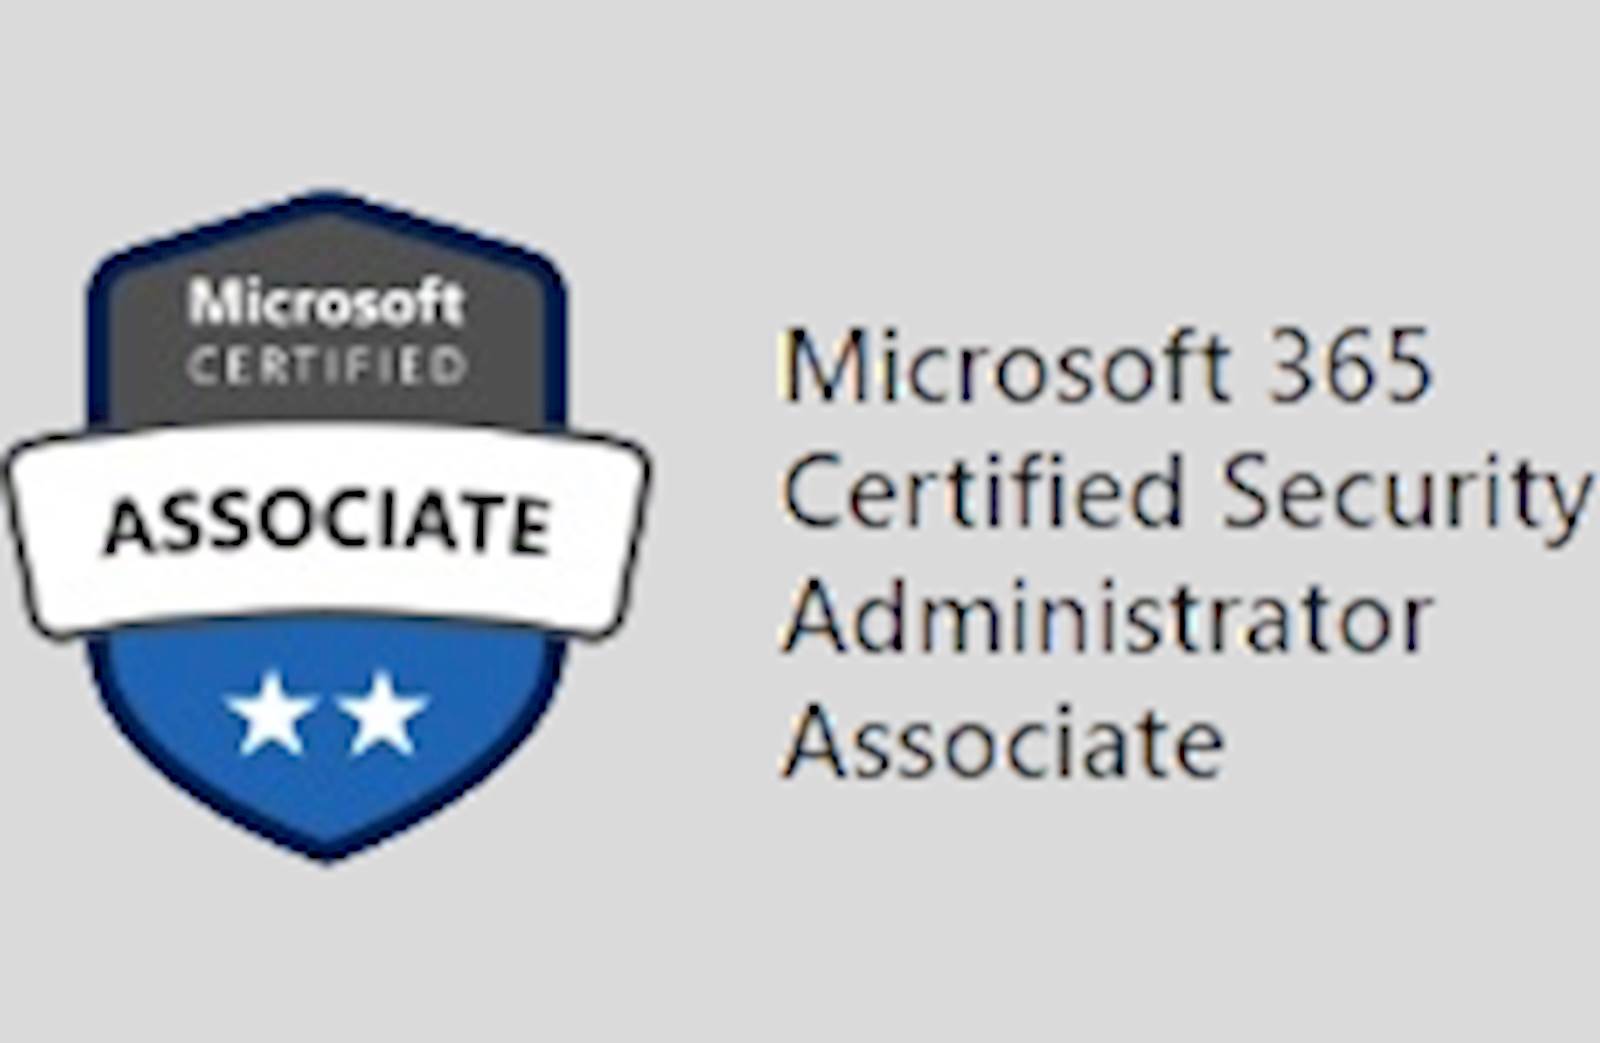 Learn more about the Security Administrator Track Course